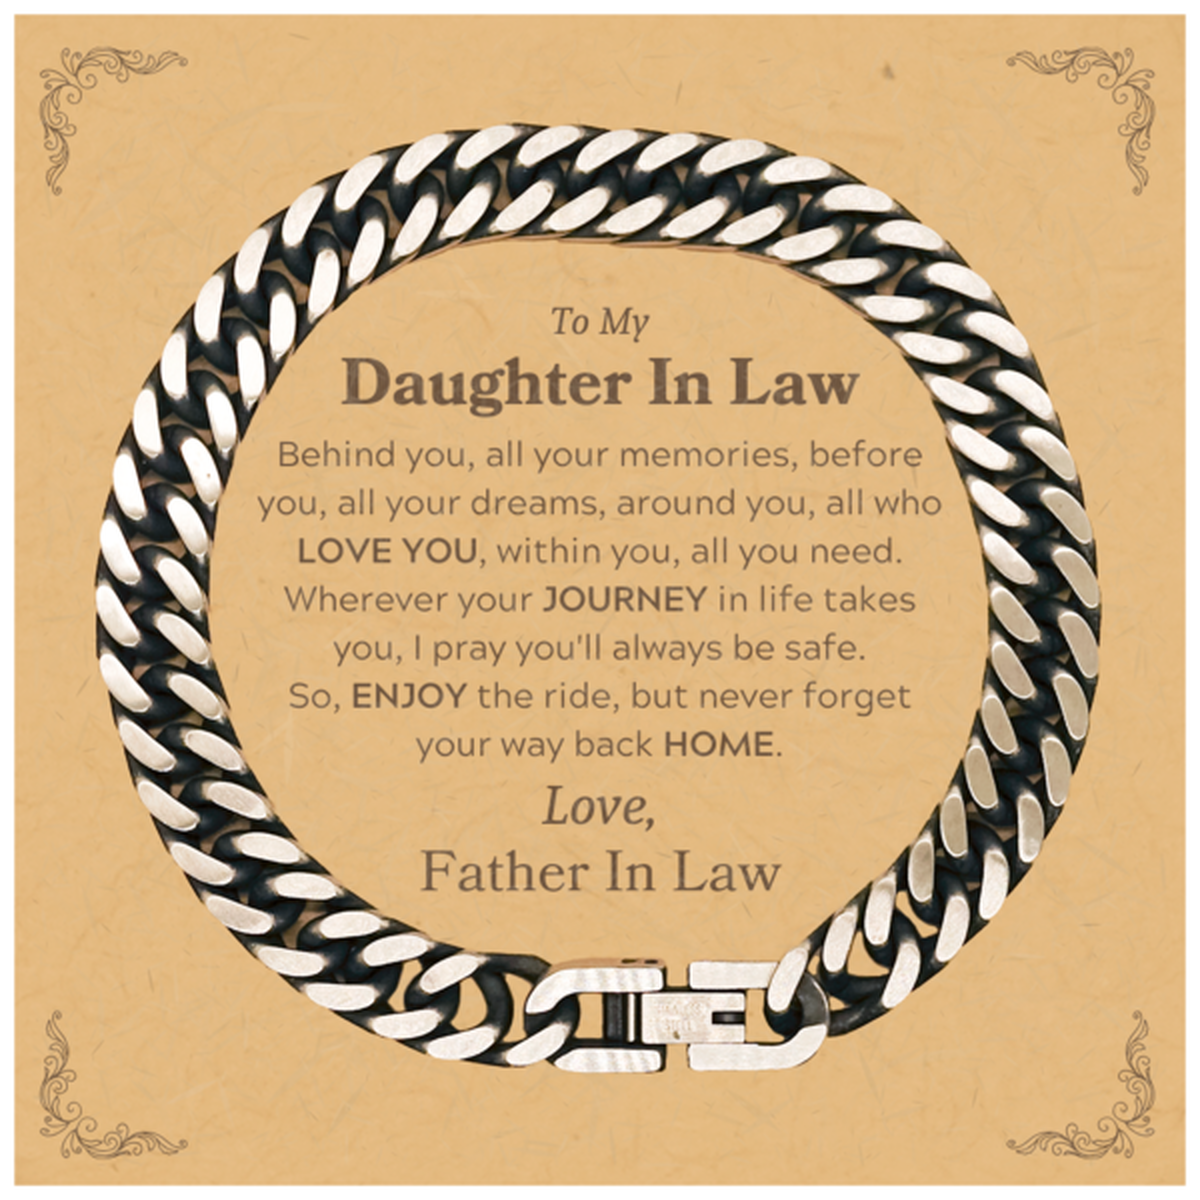 To My Daughter In Law Graduation Gifts from Father In Law, Daughter In Law Cuban Link Chain Bracelet Christmas Birthday Gifts for Daughter In Law Behind you, all your memories, before you, all your dreams. Love, Father In Law